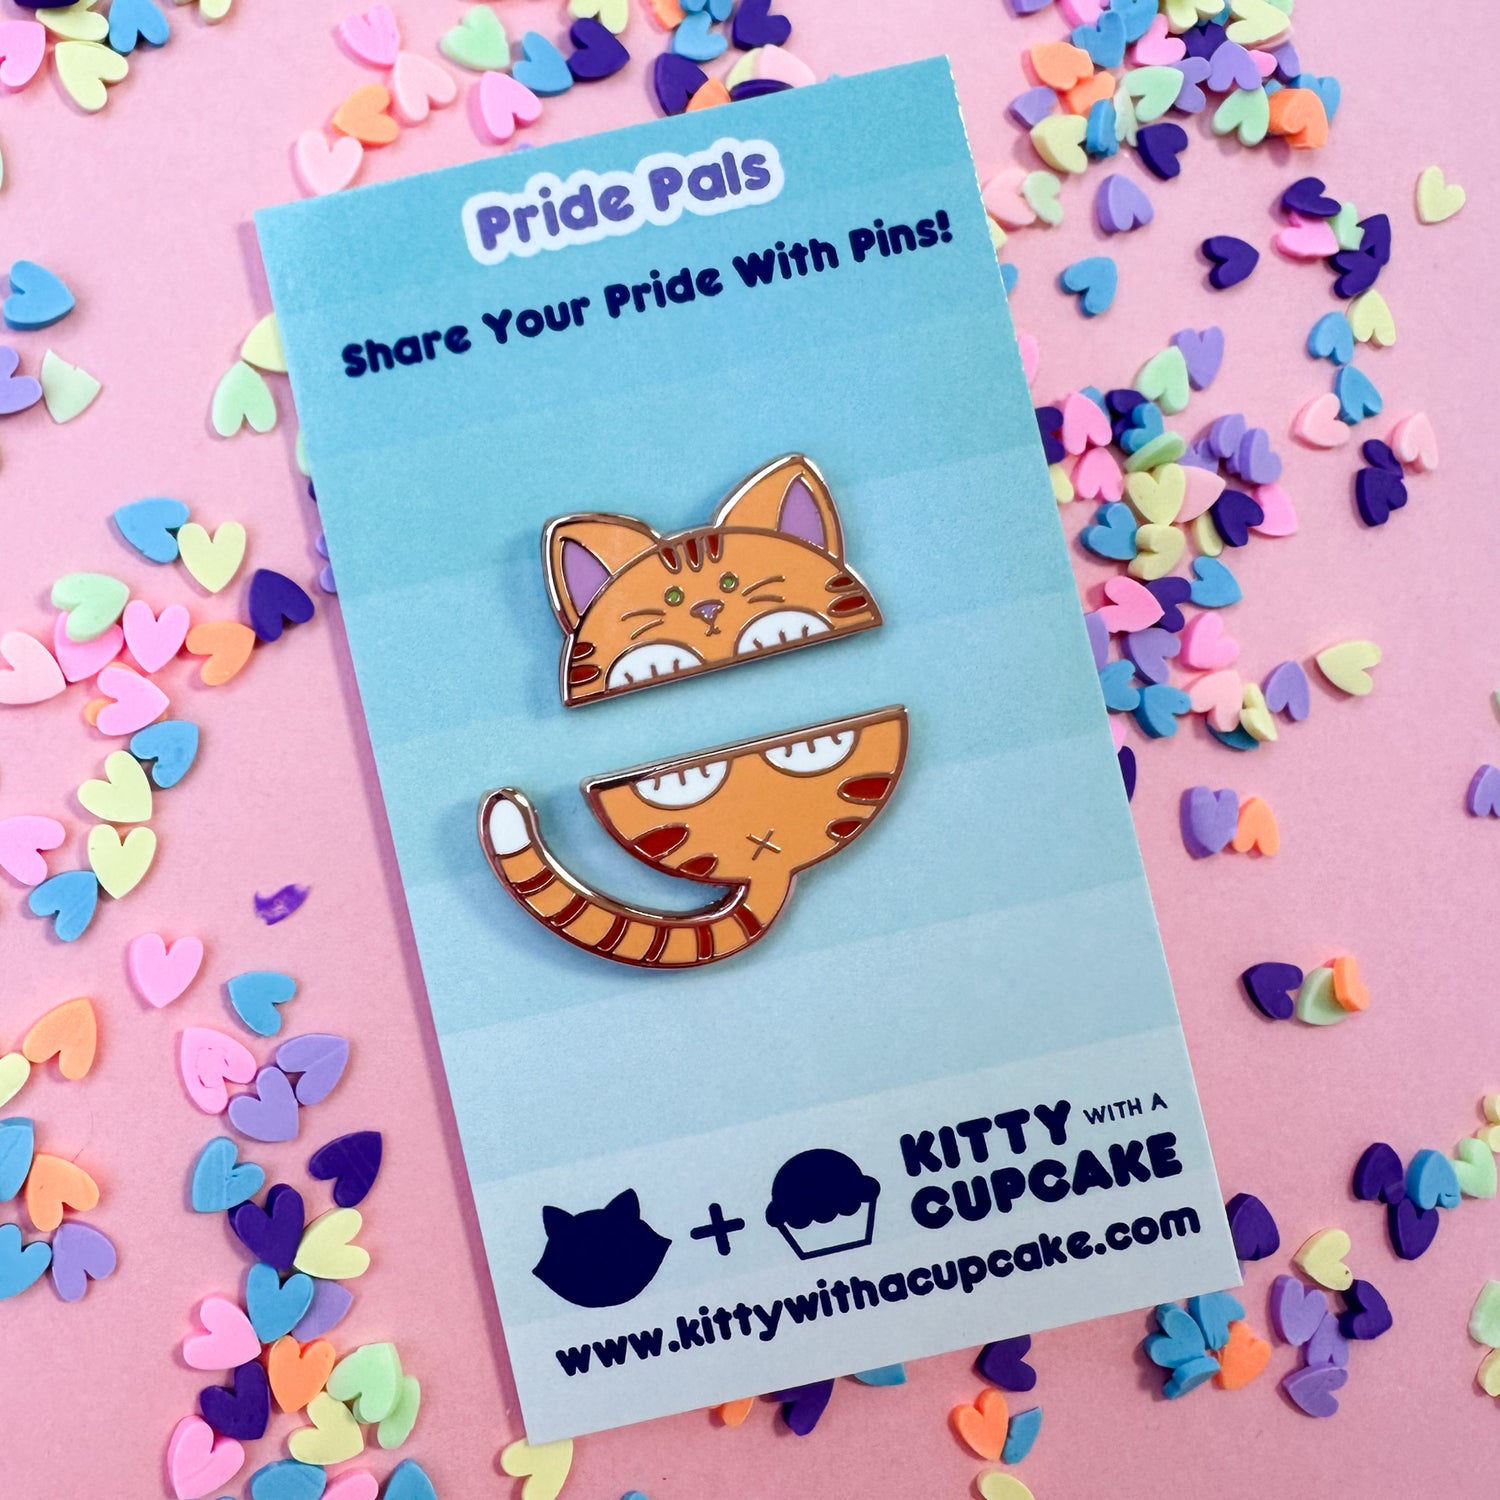 Two enamel pins that come together to form the top and bottom half of a cat packaged on a card. The background is pink with candy hearts around. 